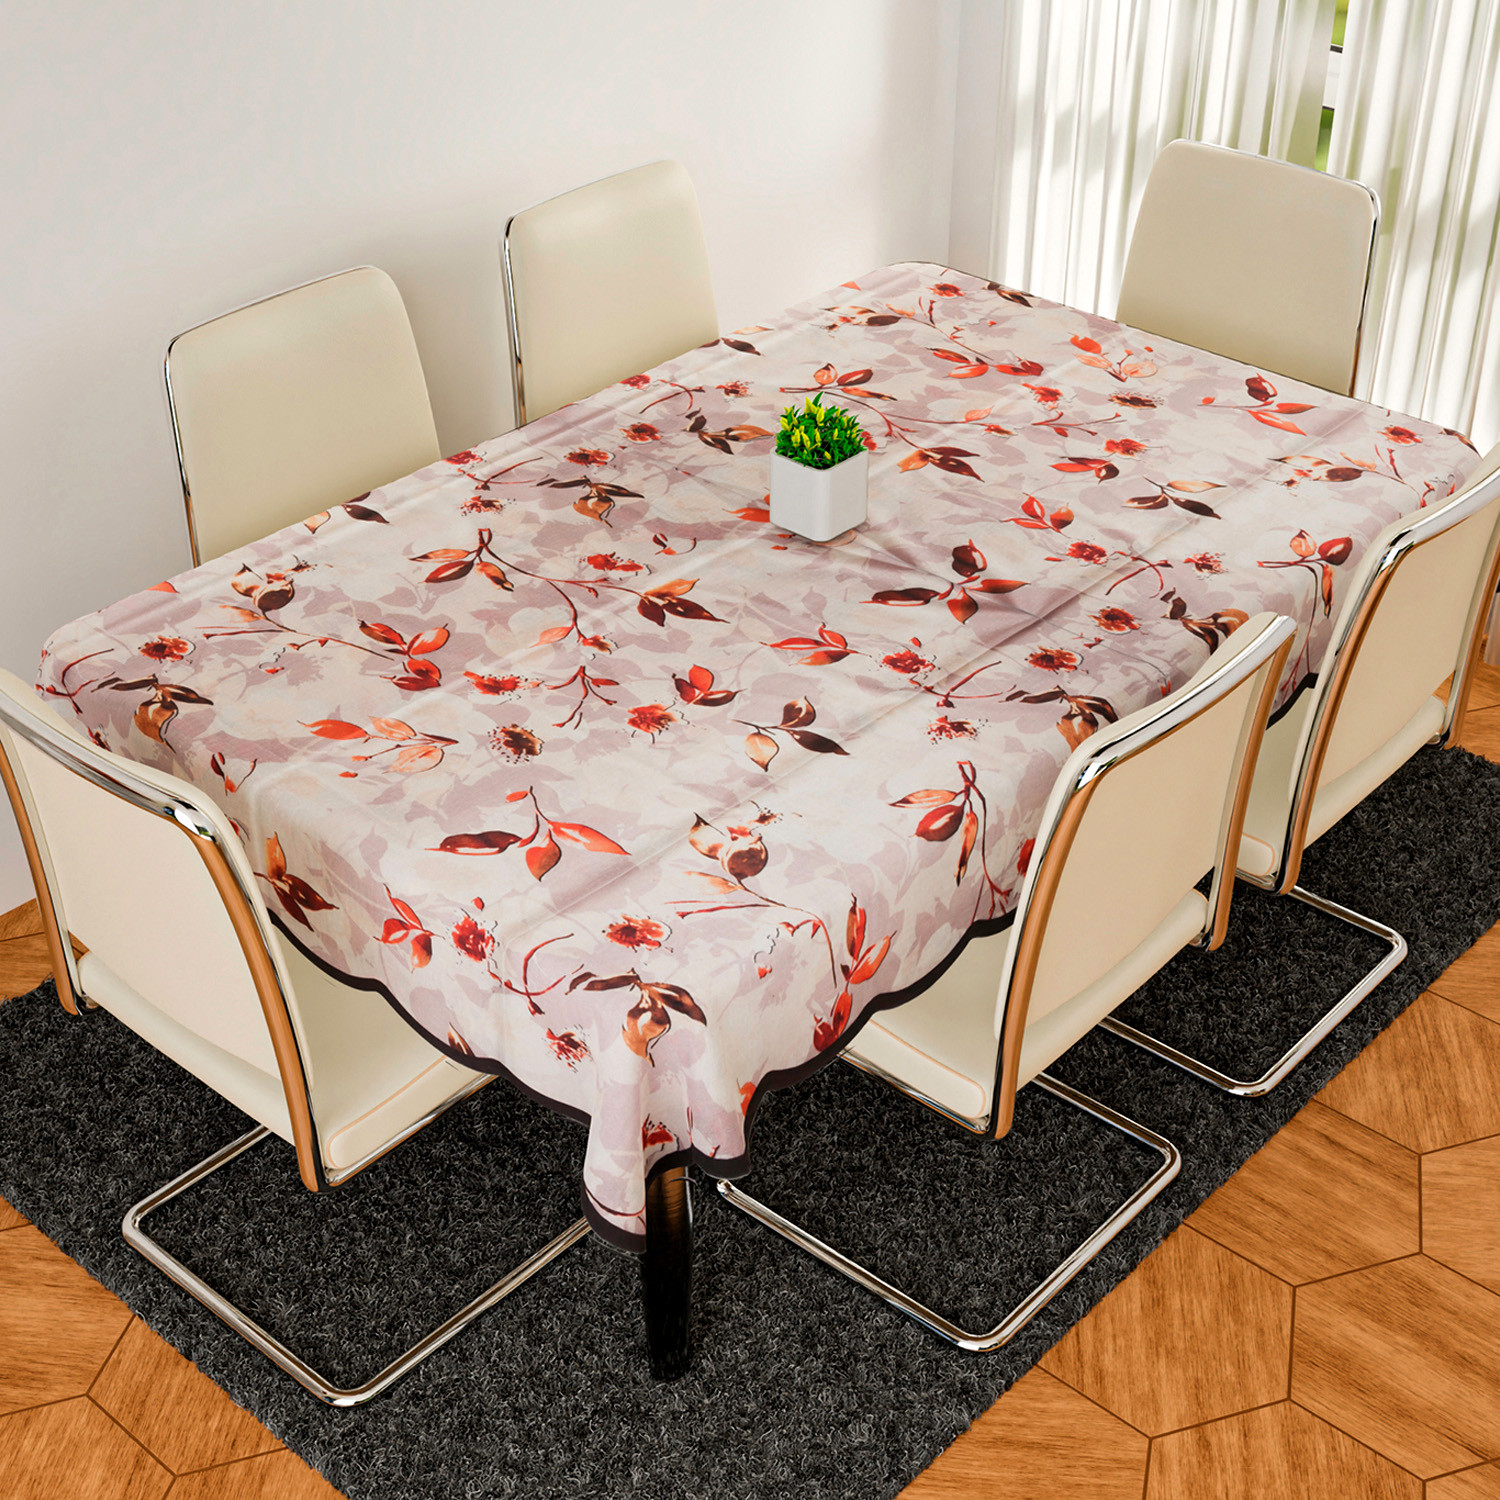 Kuber Industries Dining Table Cover | Net Shinning Polyester Special Leaf Print | Table Protector Cover for Top Decoration | 60x90 Inch | Cream & Brown